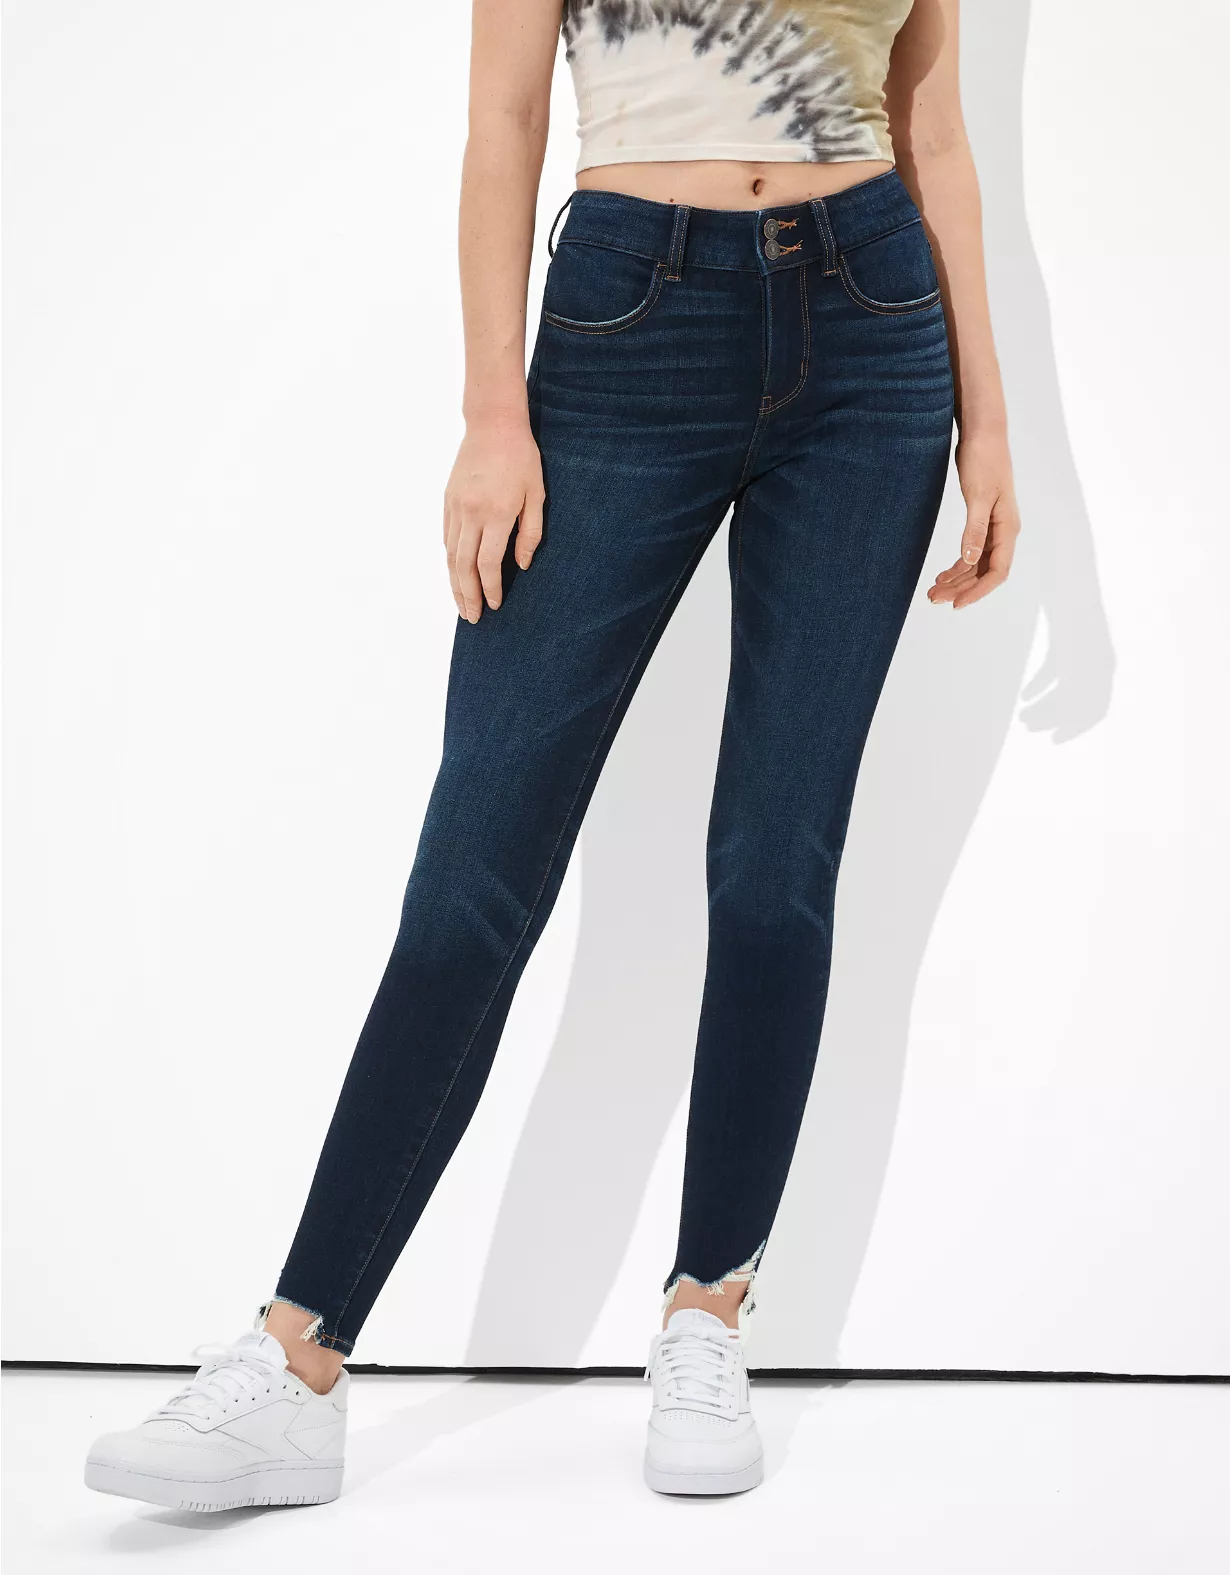 AE Dream High-Waisted Jegging Crop